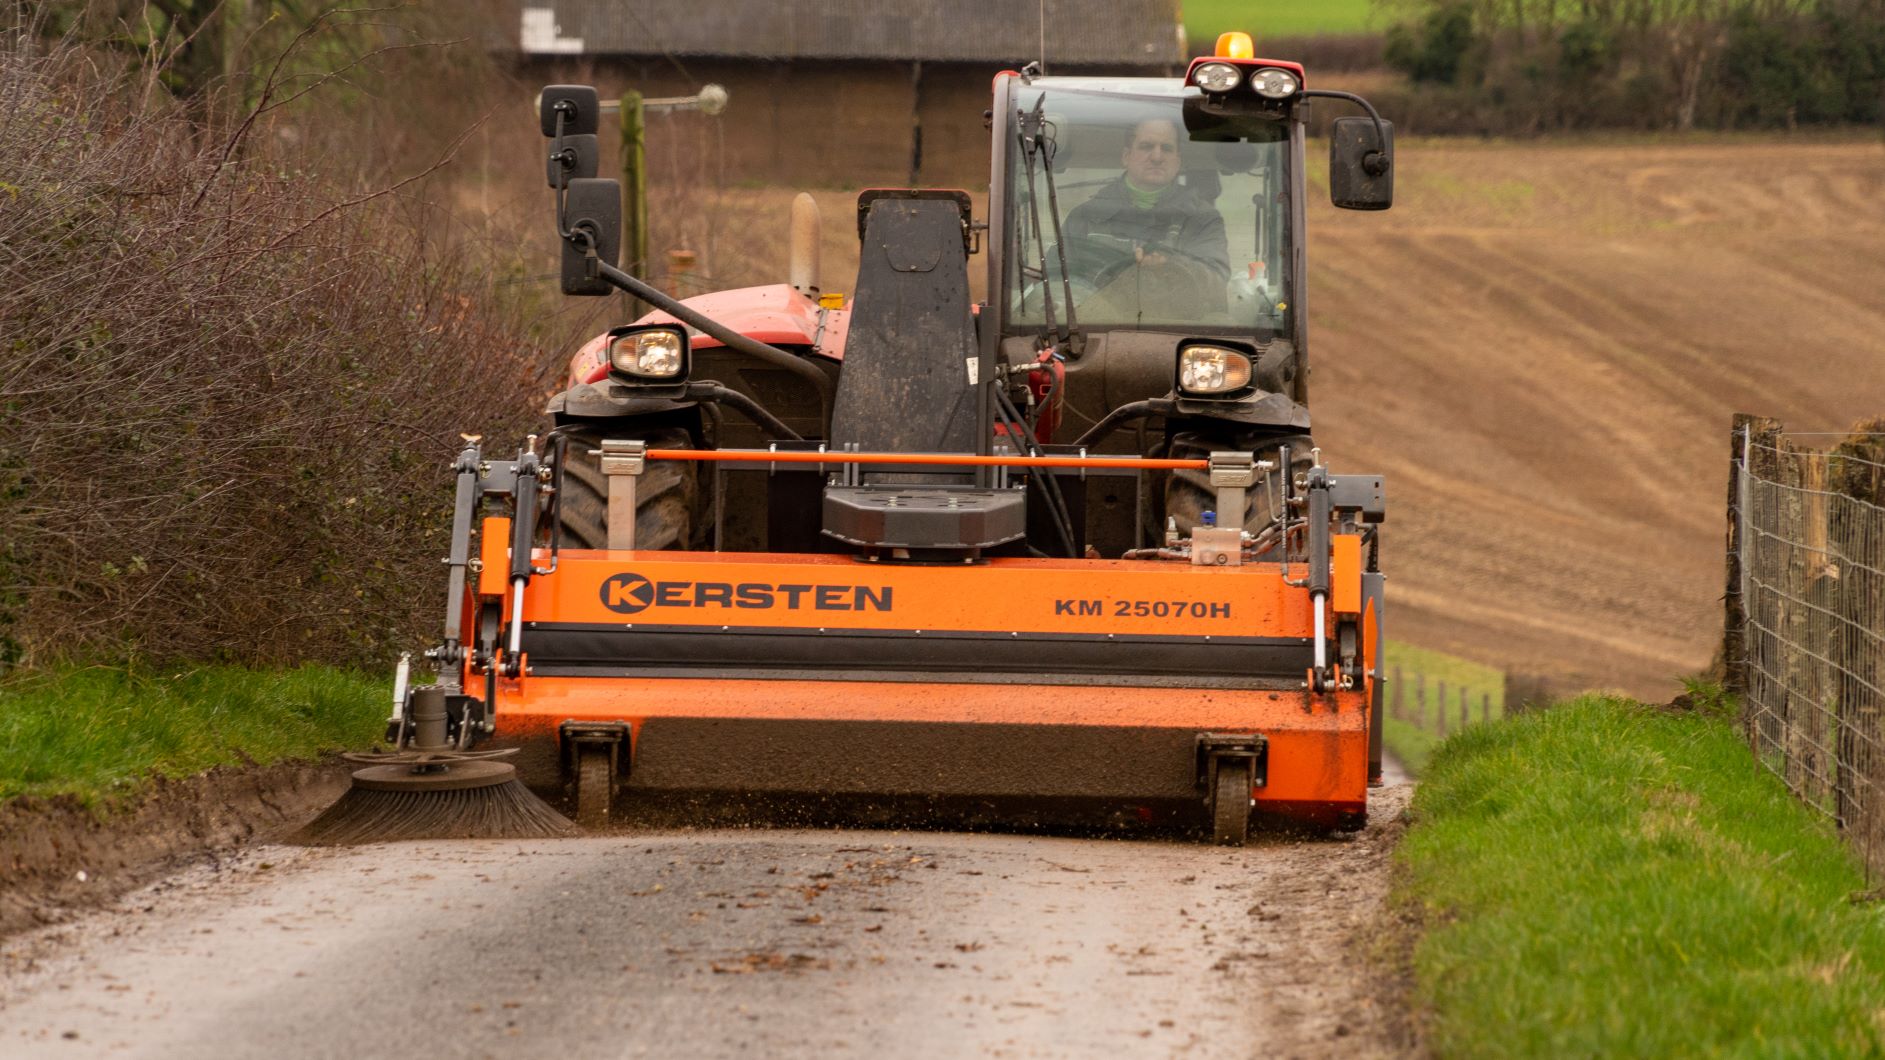 Case Study: Sweeping Mud on the road with a Manitou MT835 Telehandler - Cover Image